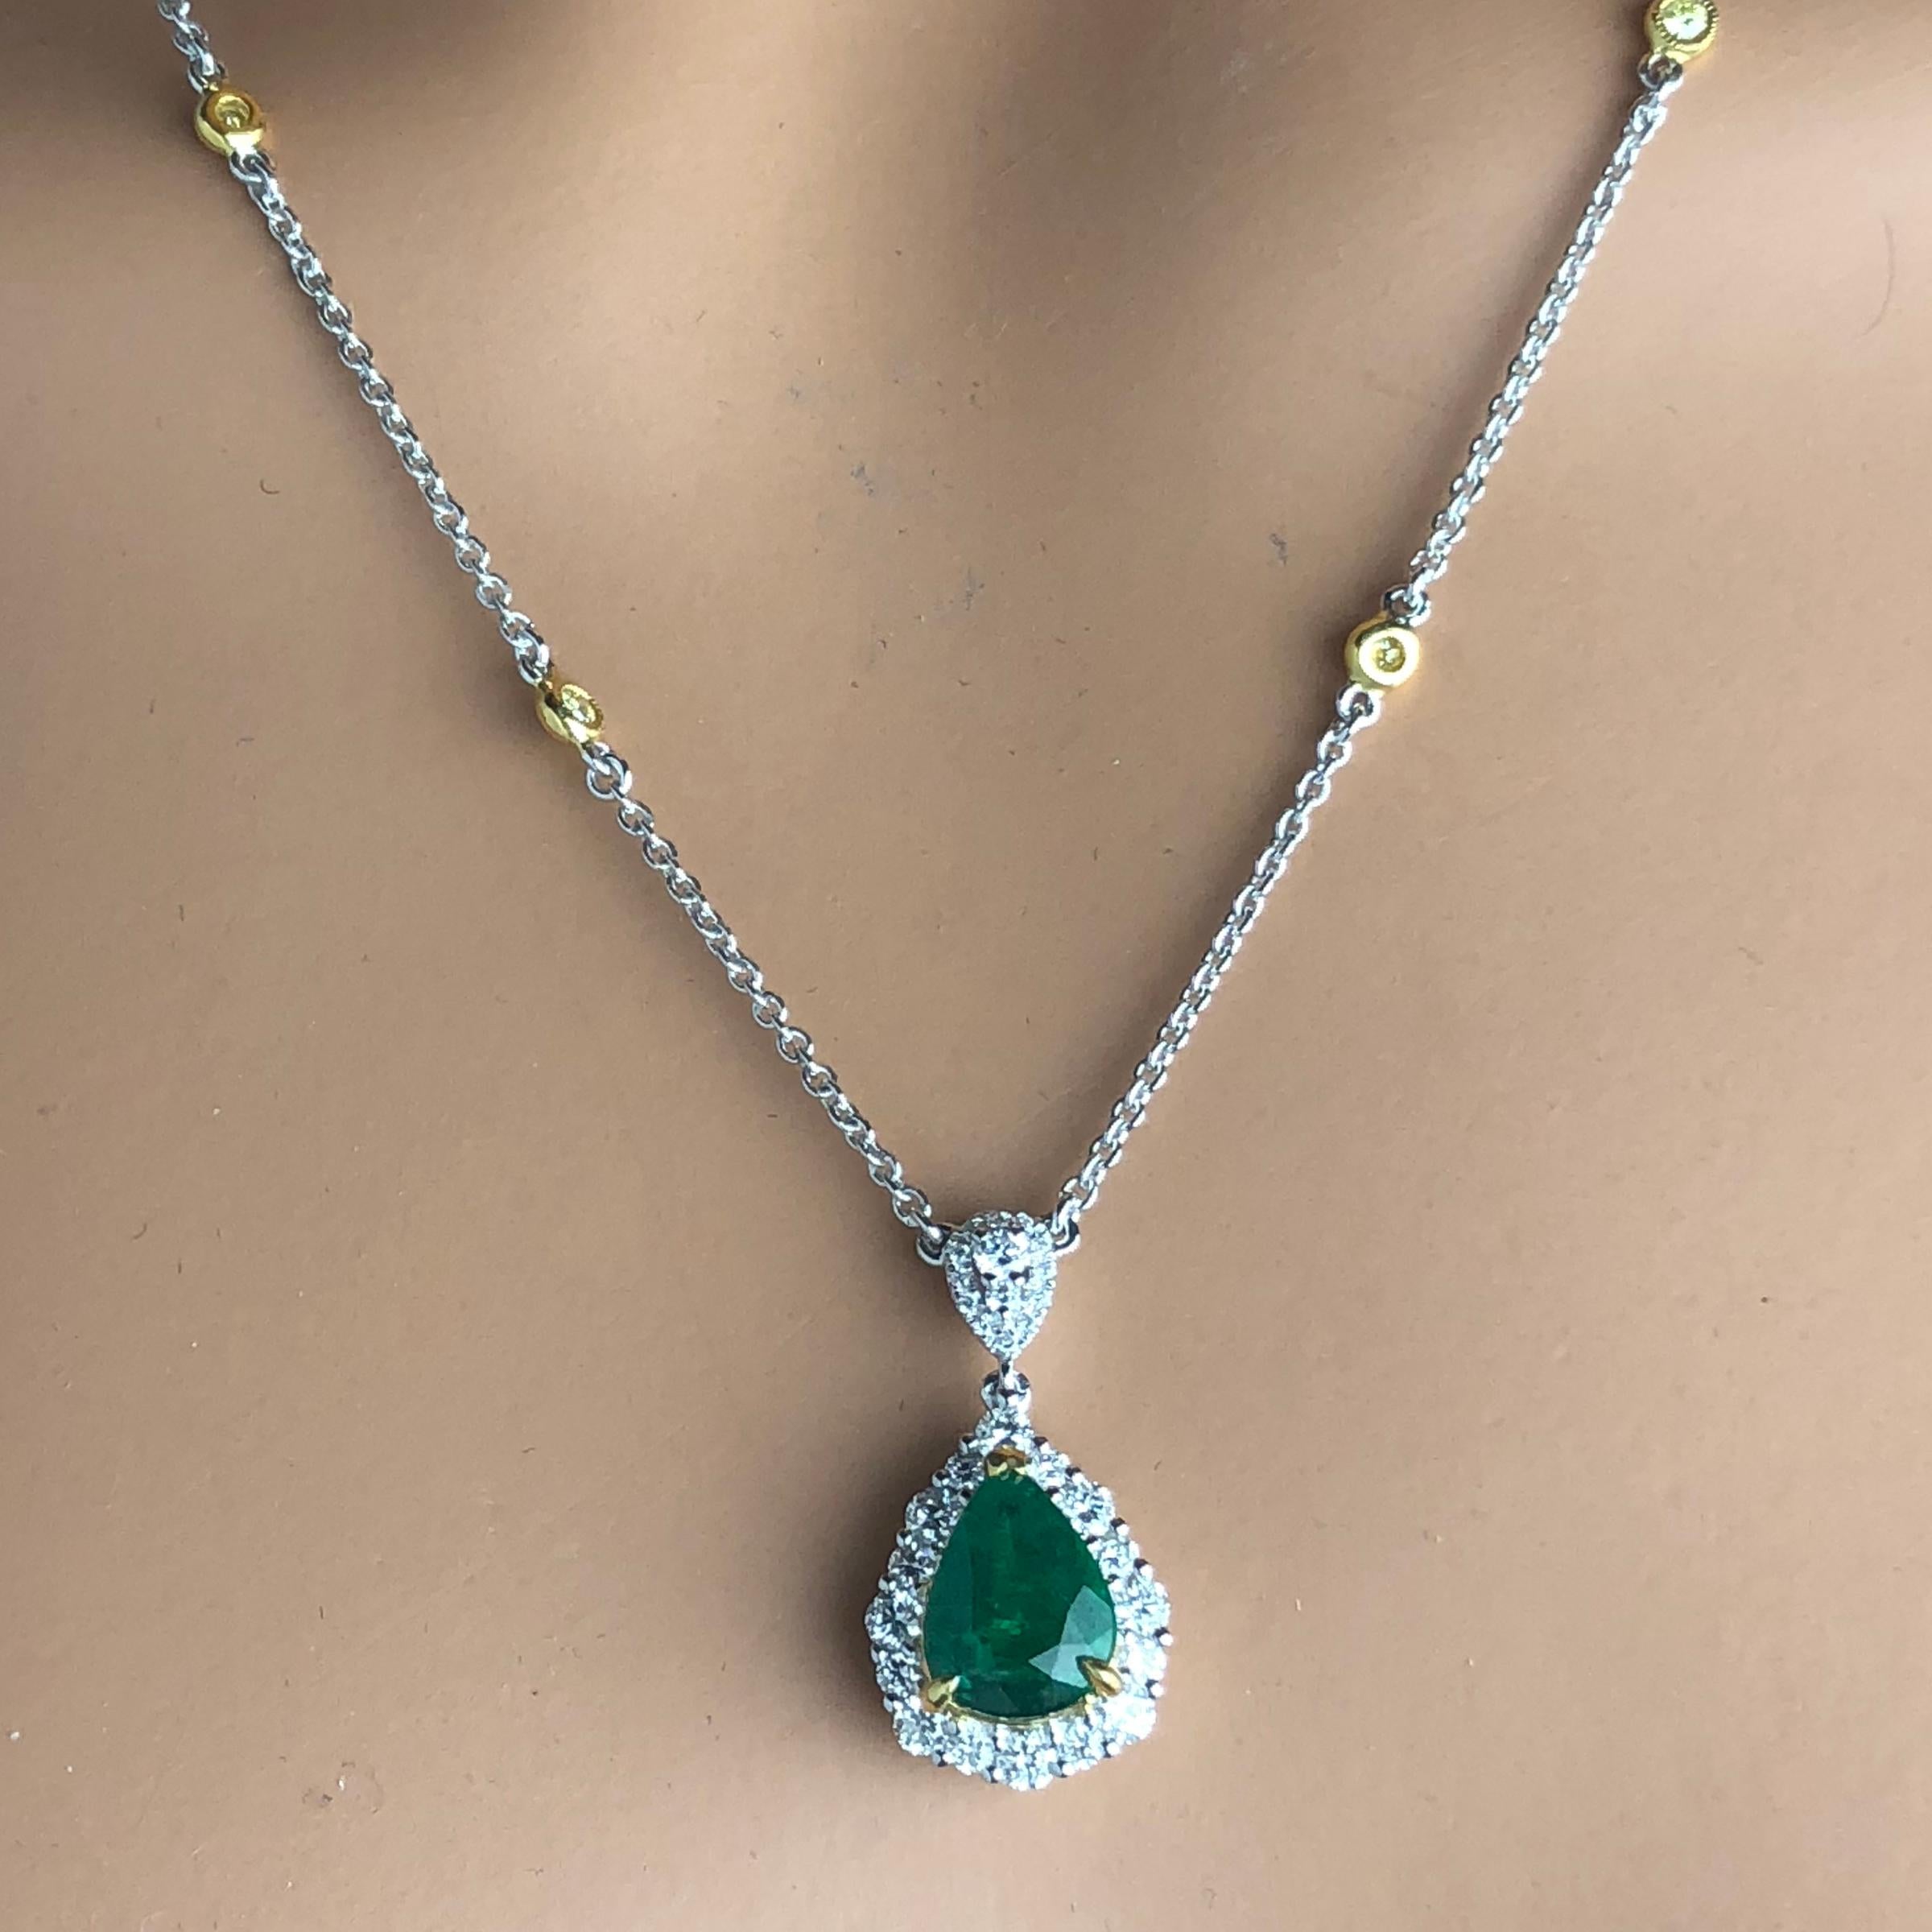 This gorgeous pendant features a 2.10 carat pear shaped Emerald center, surrounded by a halo of round white diamonds. The decorated bail also features white diamonds. With diamonds placed along the chain, the total diamond weight is 0.88